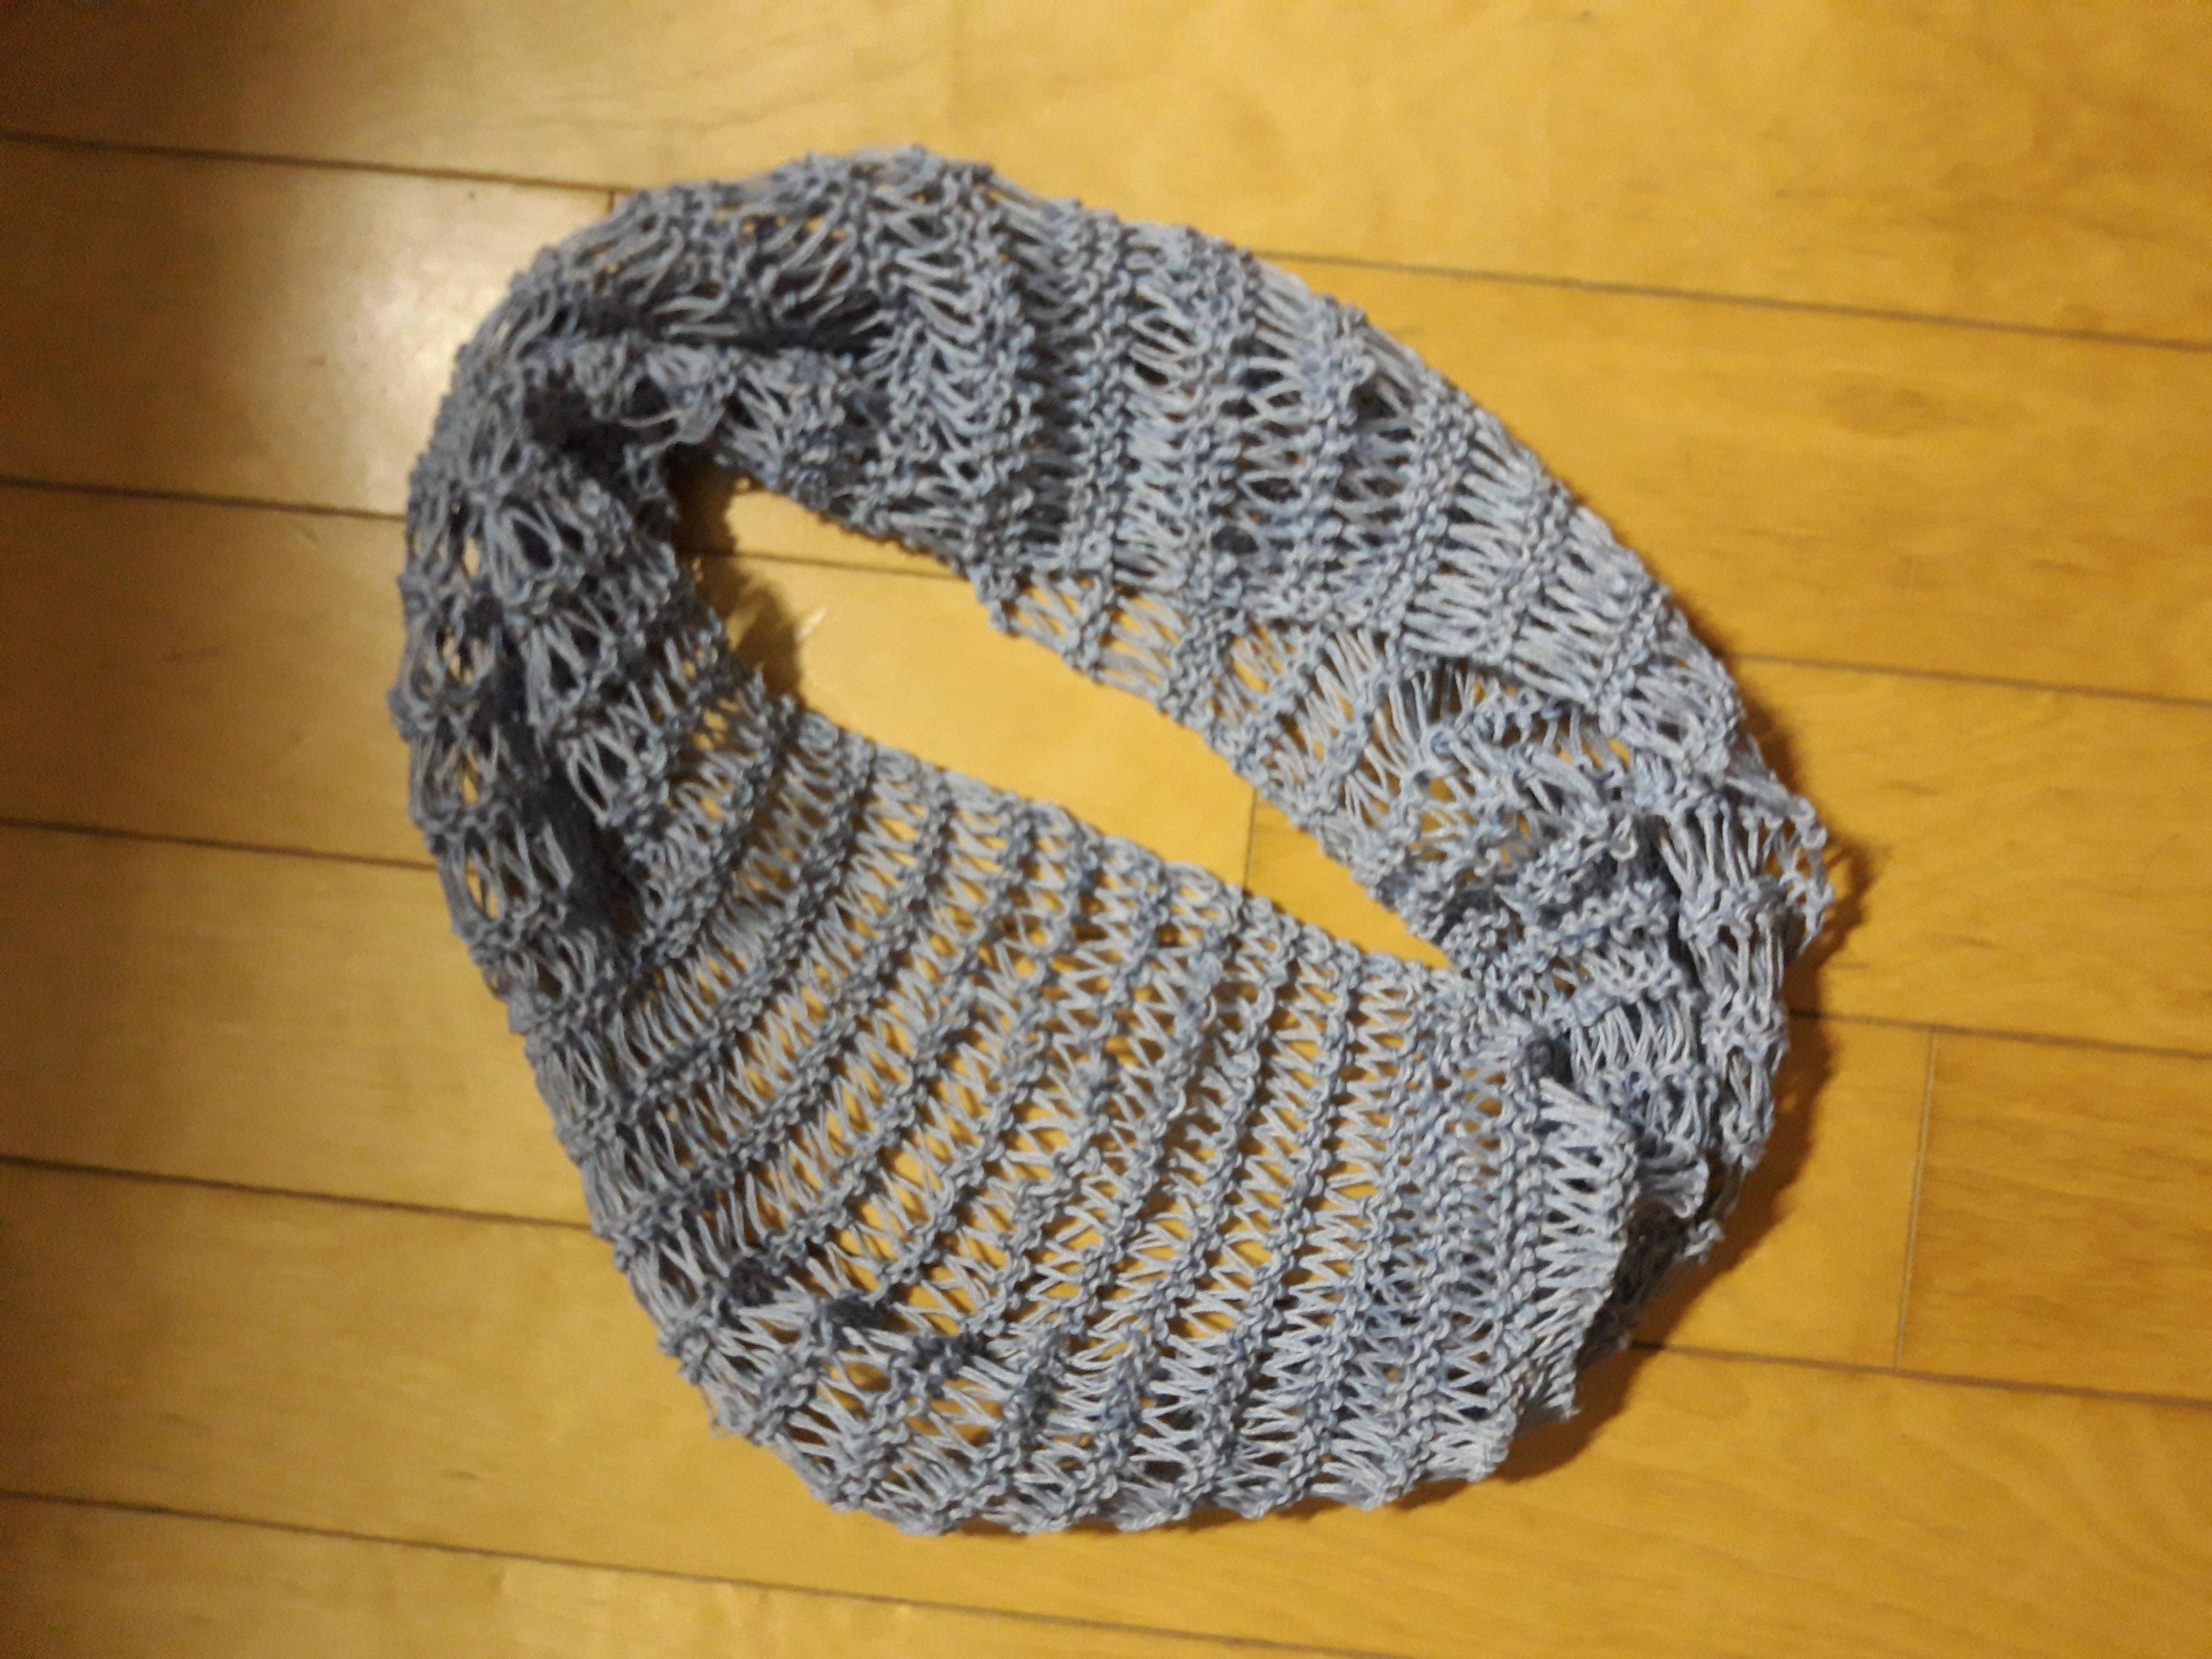 Summer Scarf Knitting Patterns Infinity Scarf I Made Please Leave Your Favorite Drop Stitchsummer